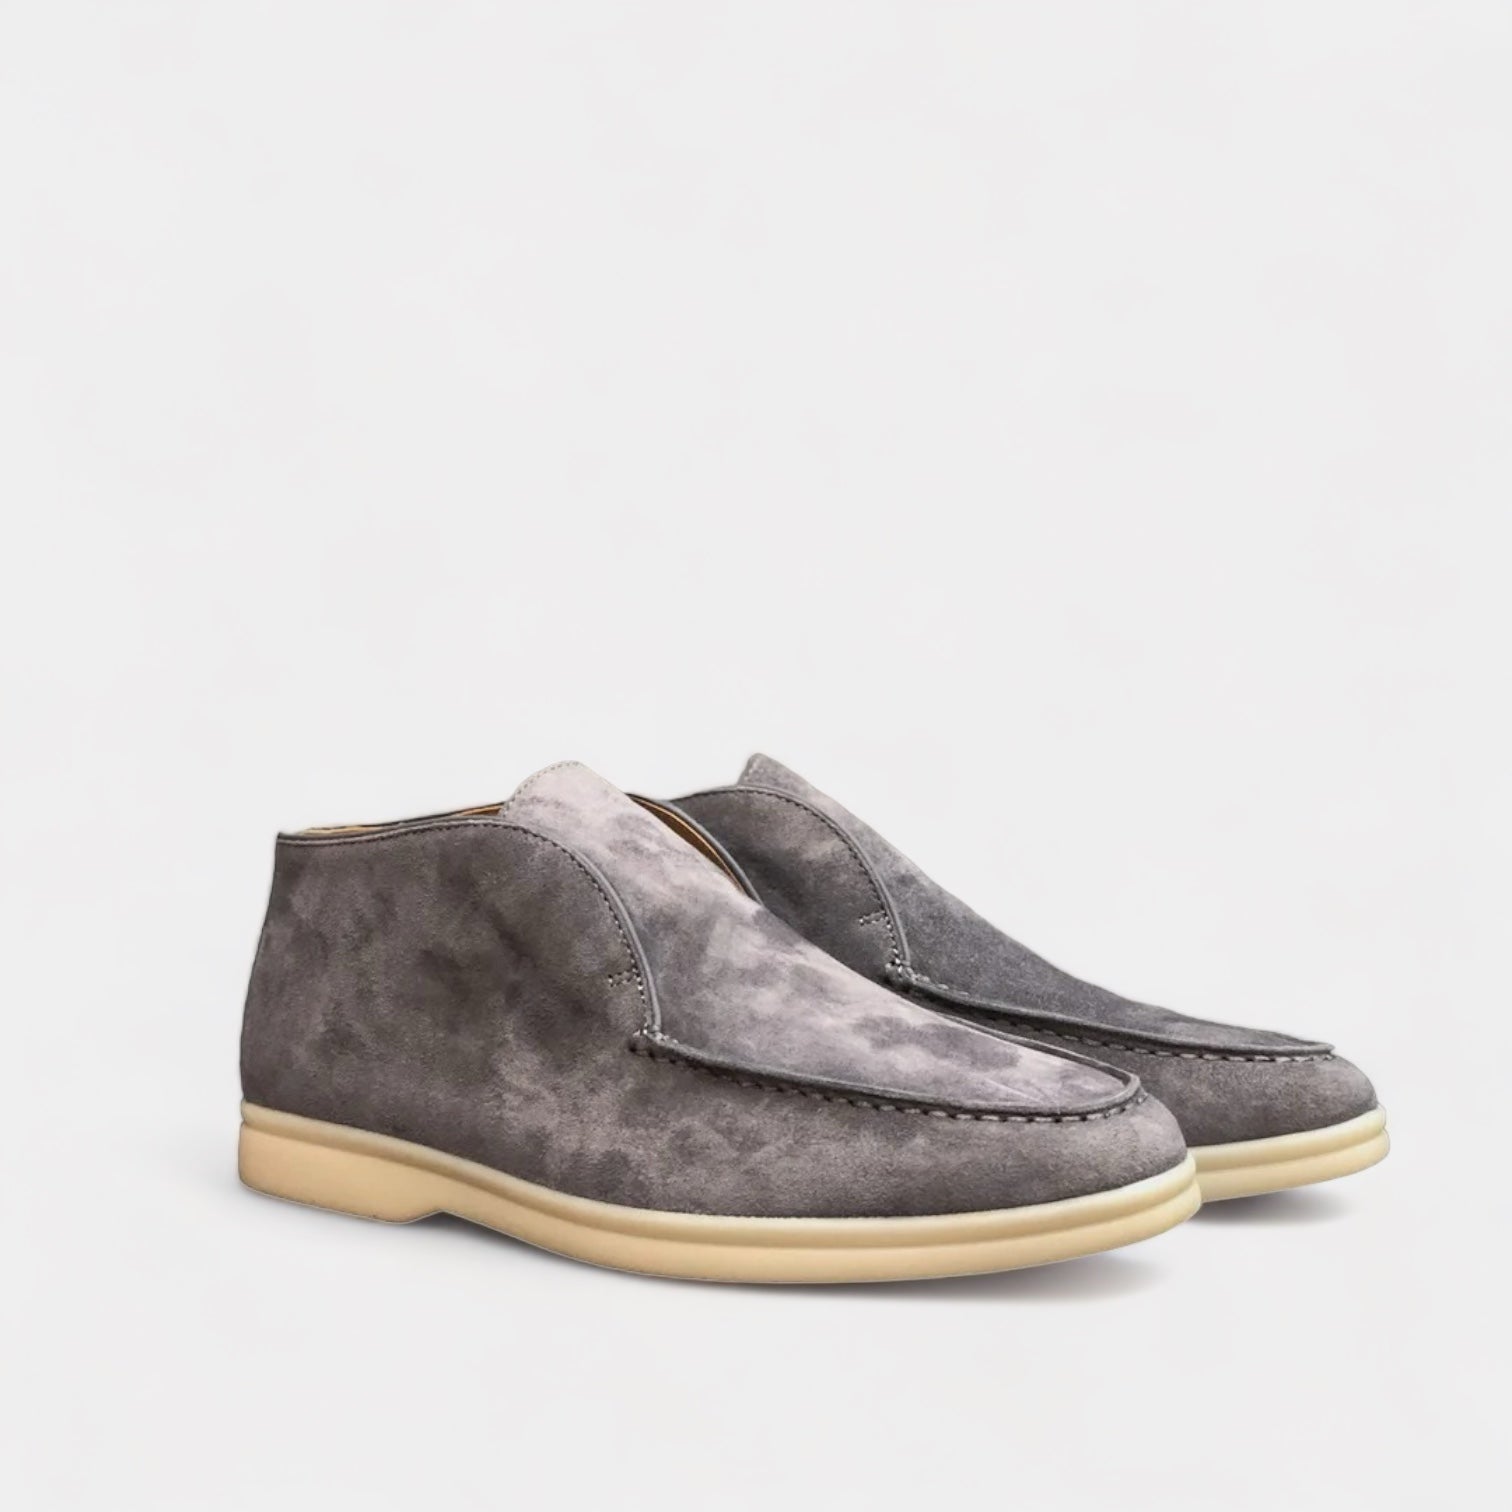 OLD MONEY Suede Shoes - WEAR OLD MONEY